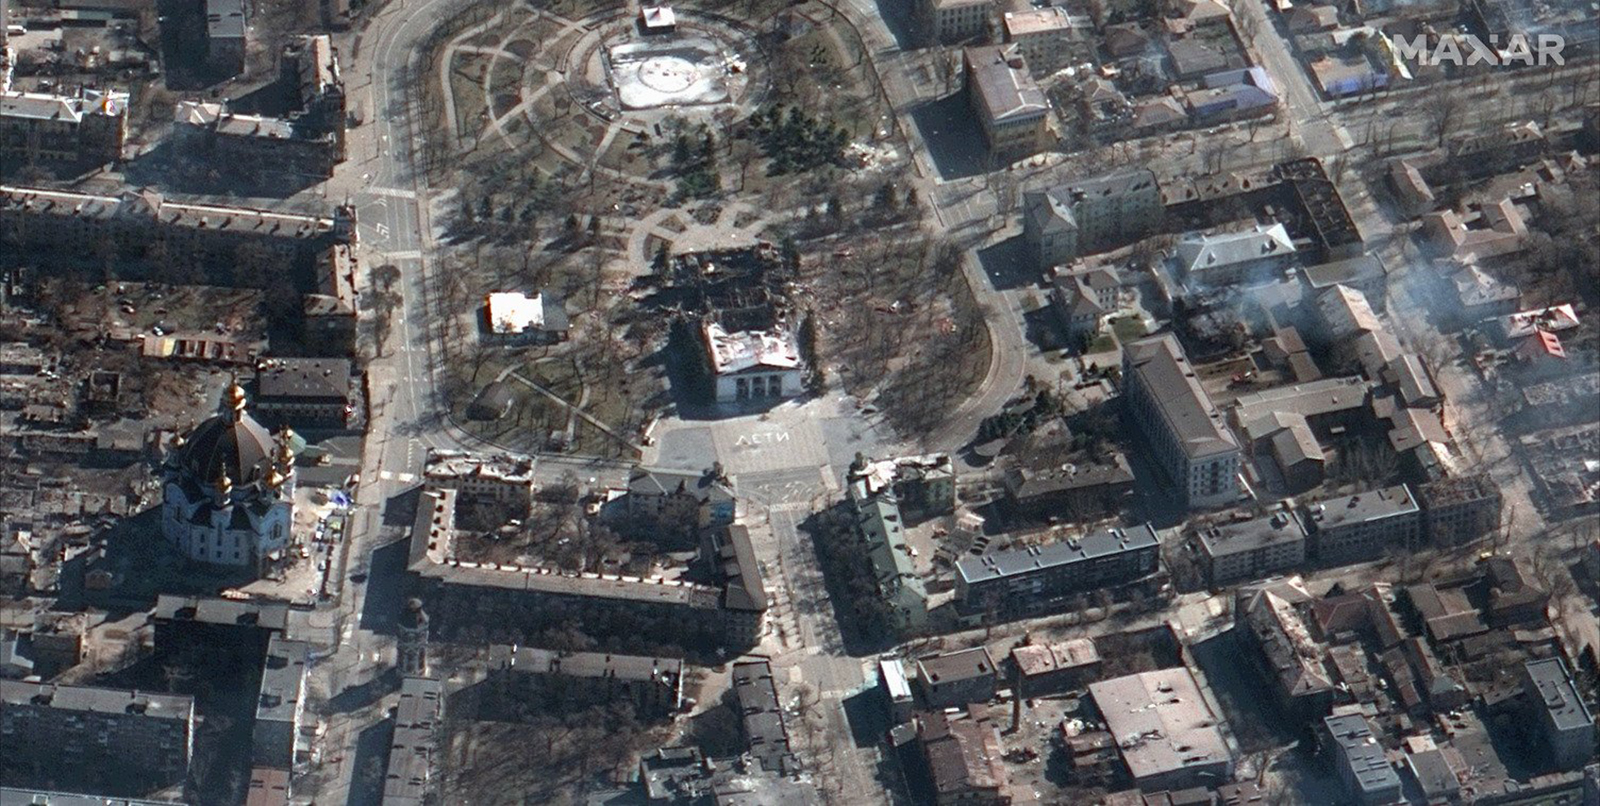 This satellite image shows a damaged theater in Mariupol, Ukraine, which was bombed earlier in the week. 